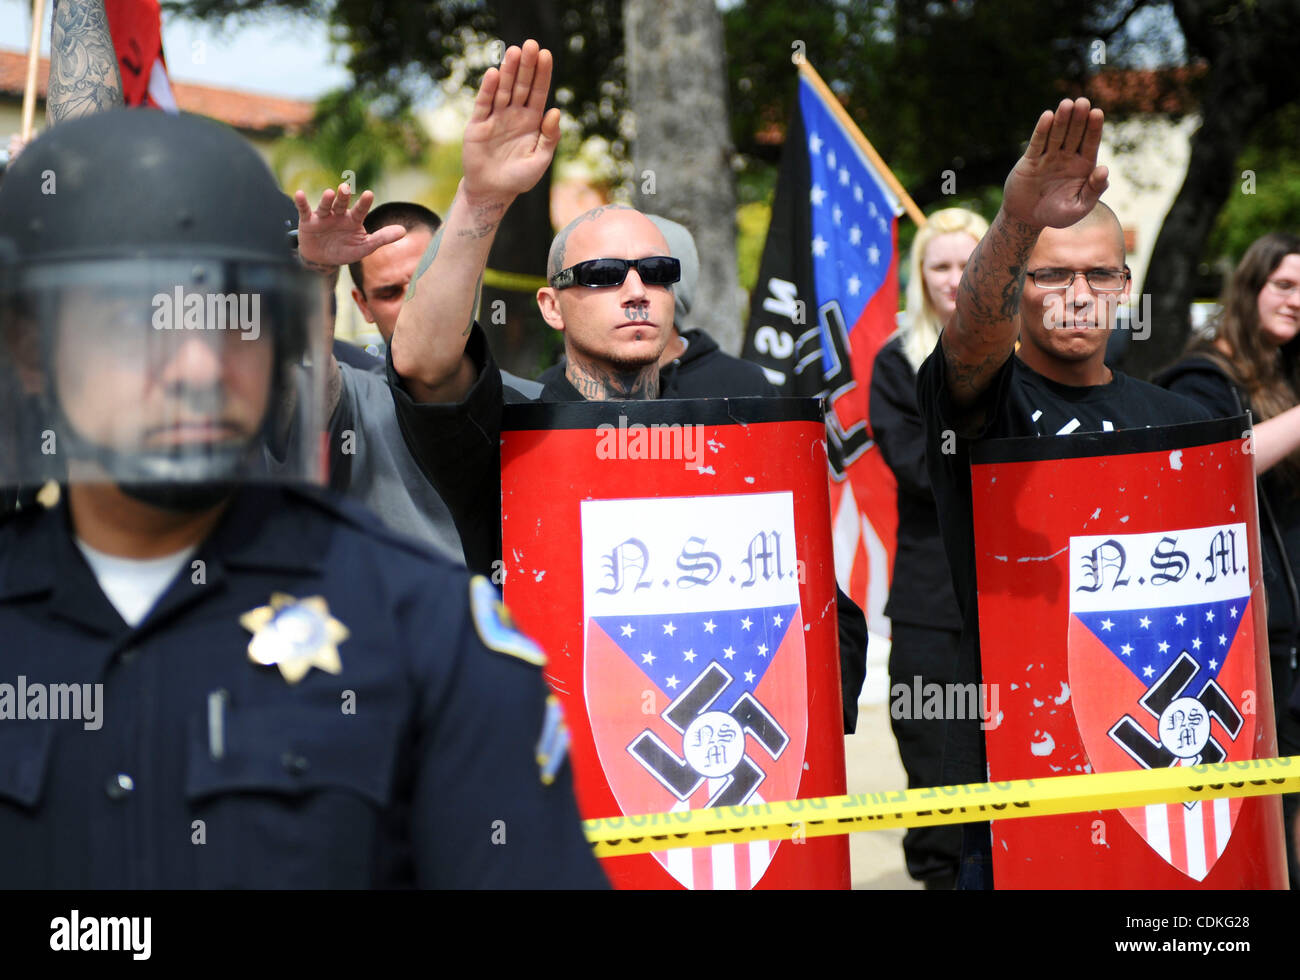 Mar 19, 2011 - Claremont, California, U.S. - Members of the National Socialist Movement rally in Claremont, California, east of Los Angeles on Saturday. (Credit Image: &#169; Josh Edelson/ZUMAPRESS.com) Stock Photo